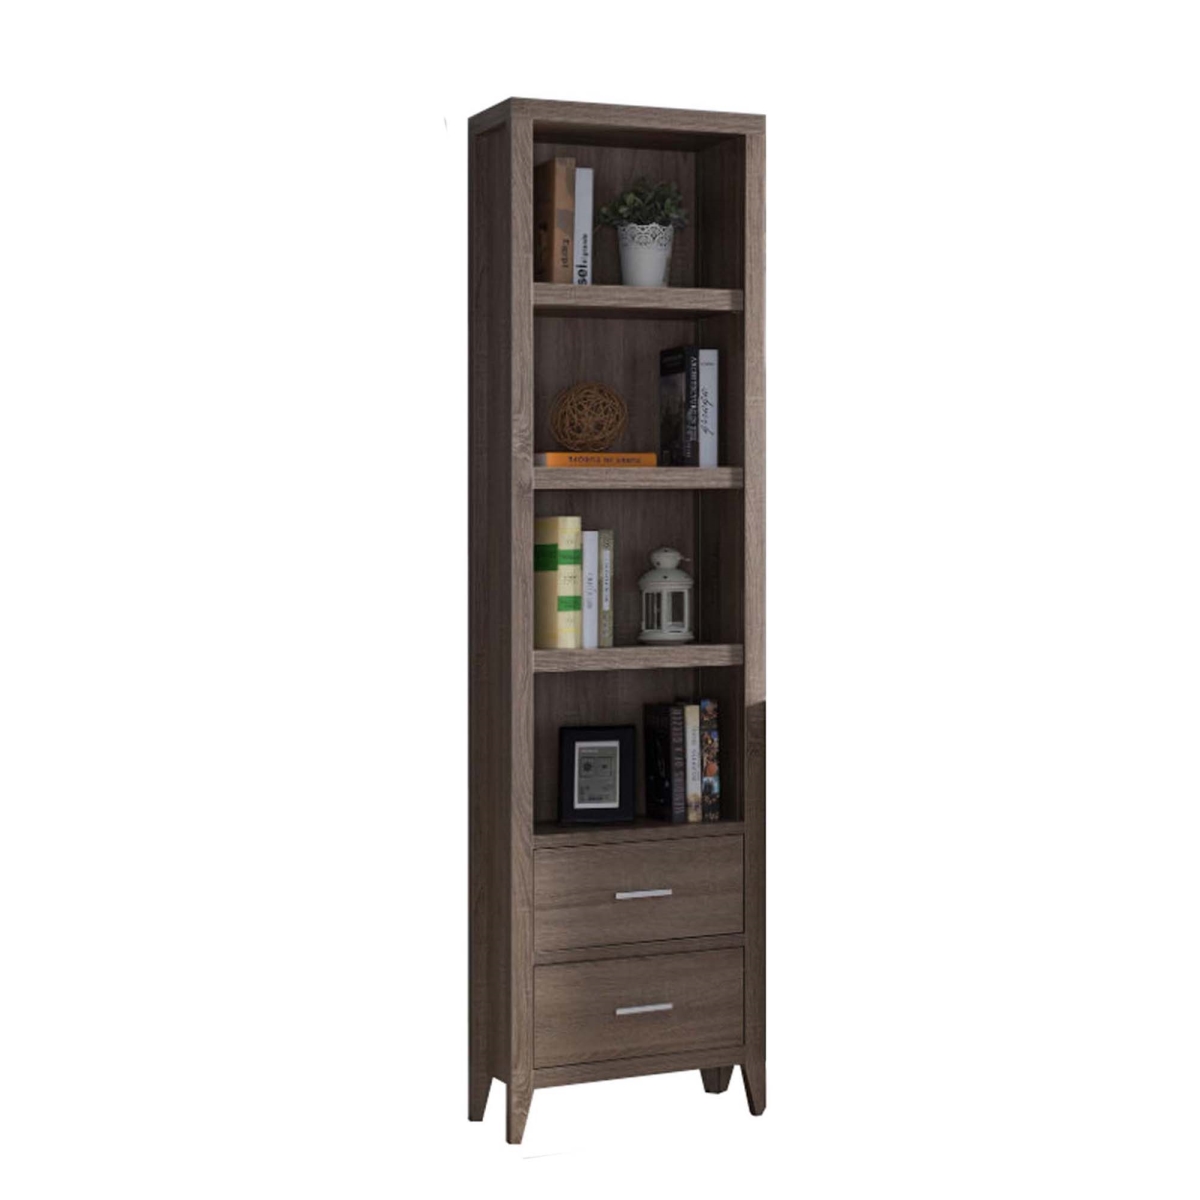 352278 Wooden Media Tower With Four Open Shelves & Two Drawers, Dark Taupe Brown